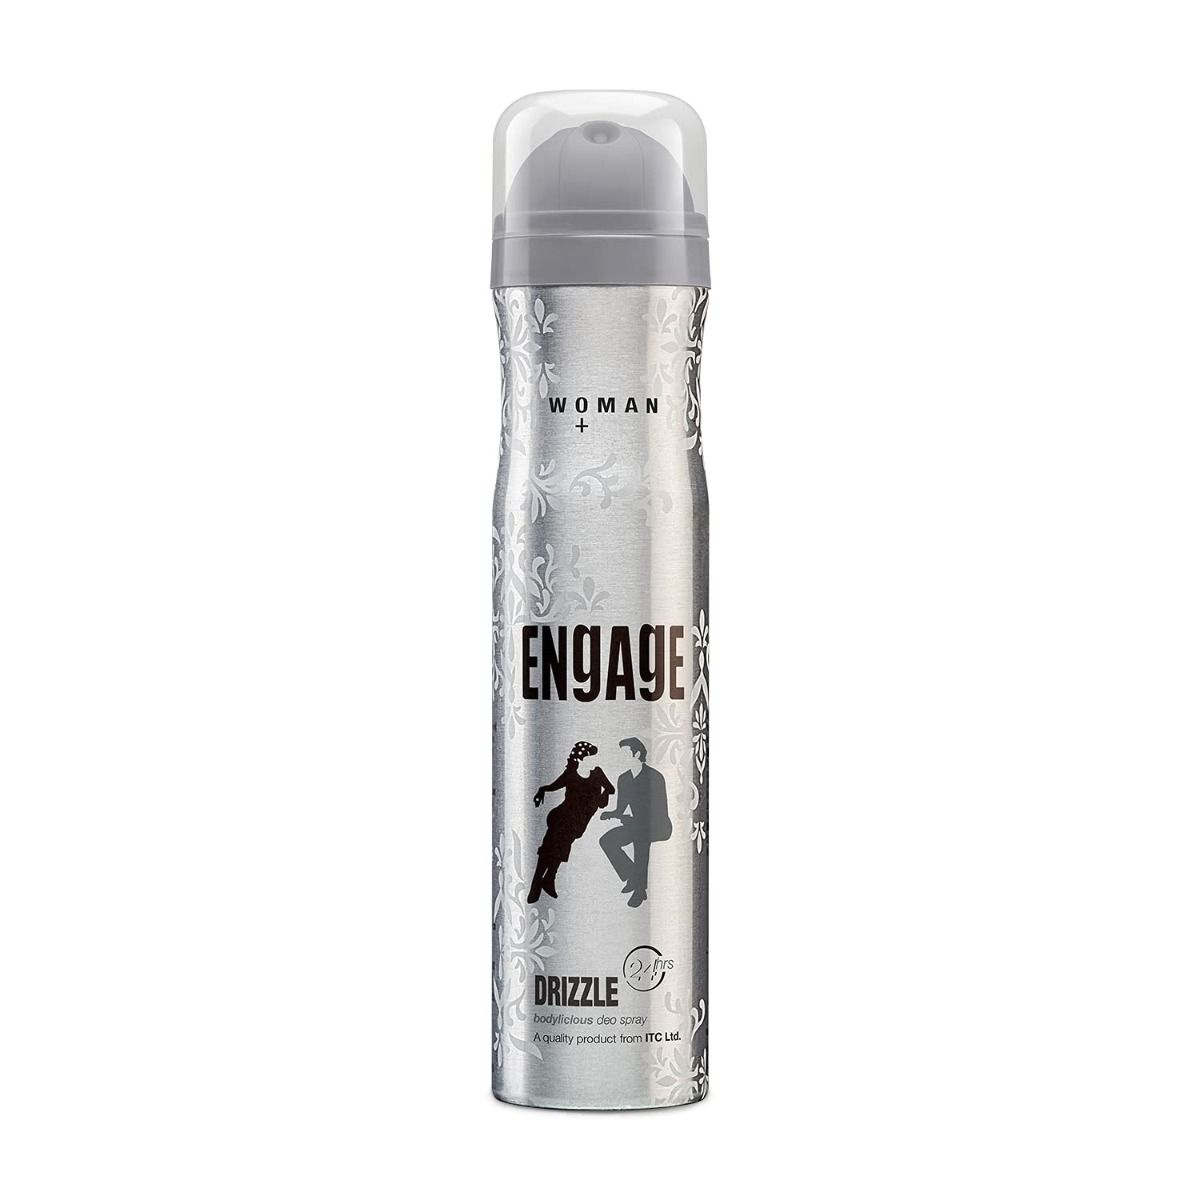 Engage Drizzle Deodorant Body Spray For Women, 150 ml, Pack of 1 